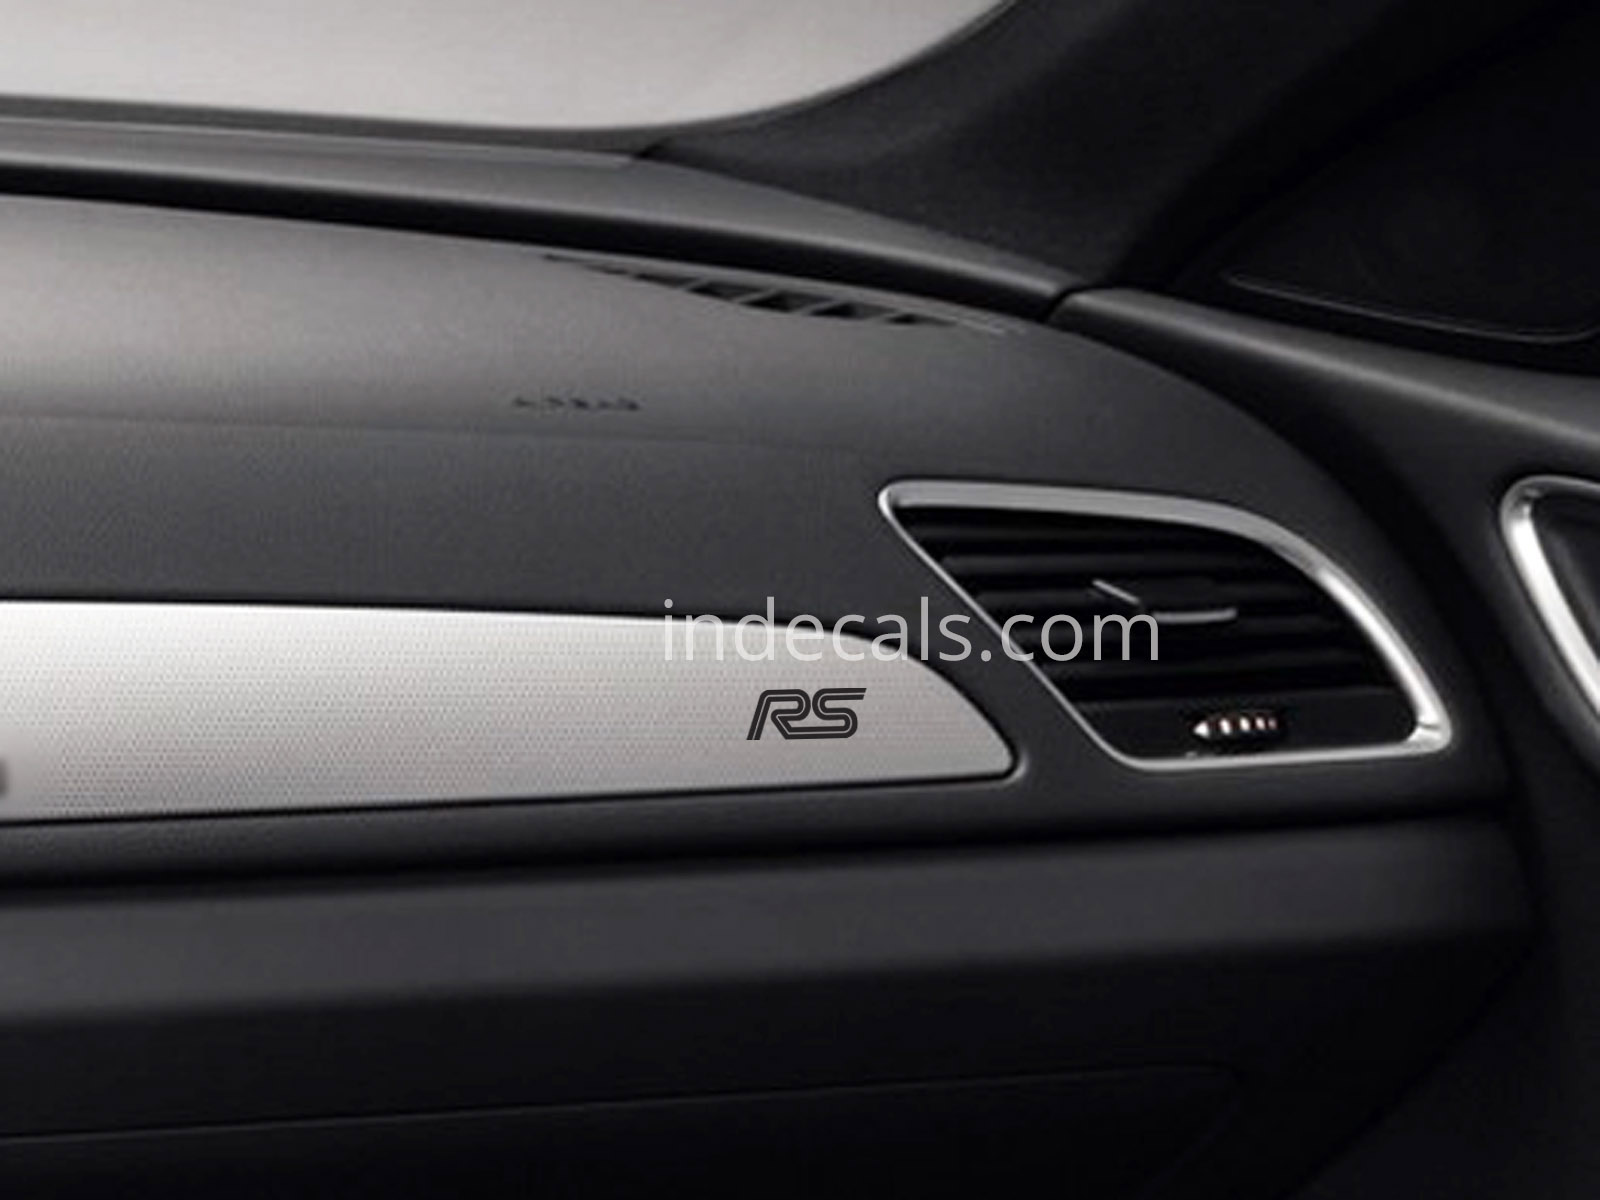 3 x Ford RS Stickers for Dash Trim - Black